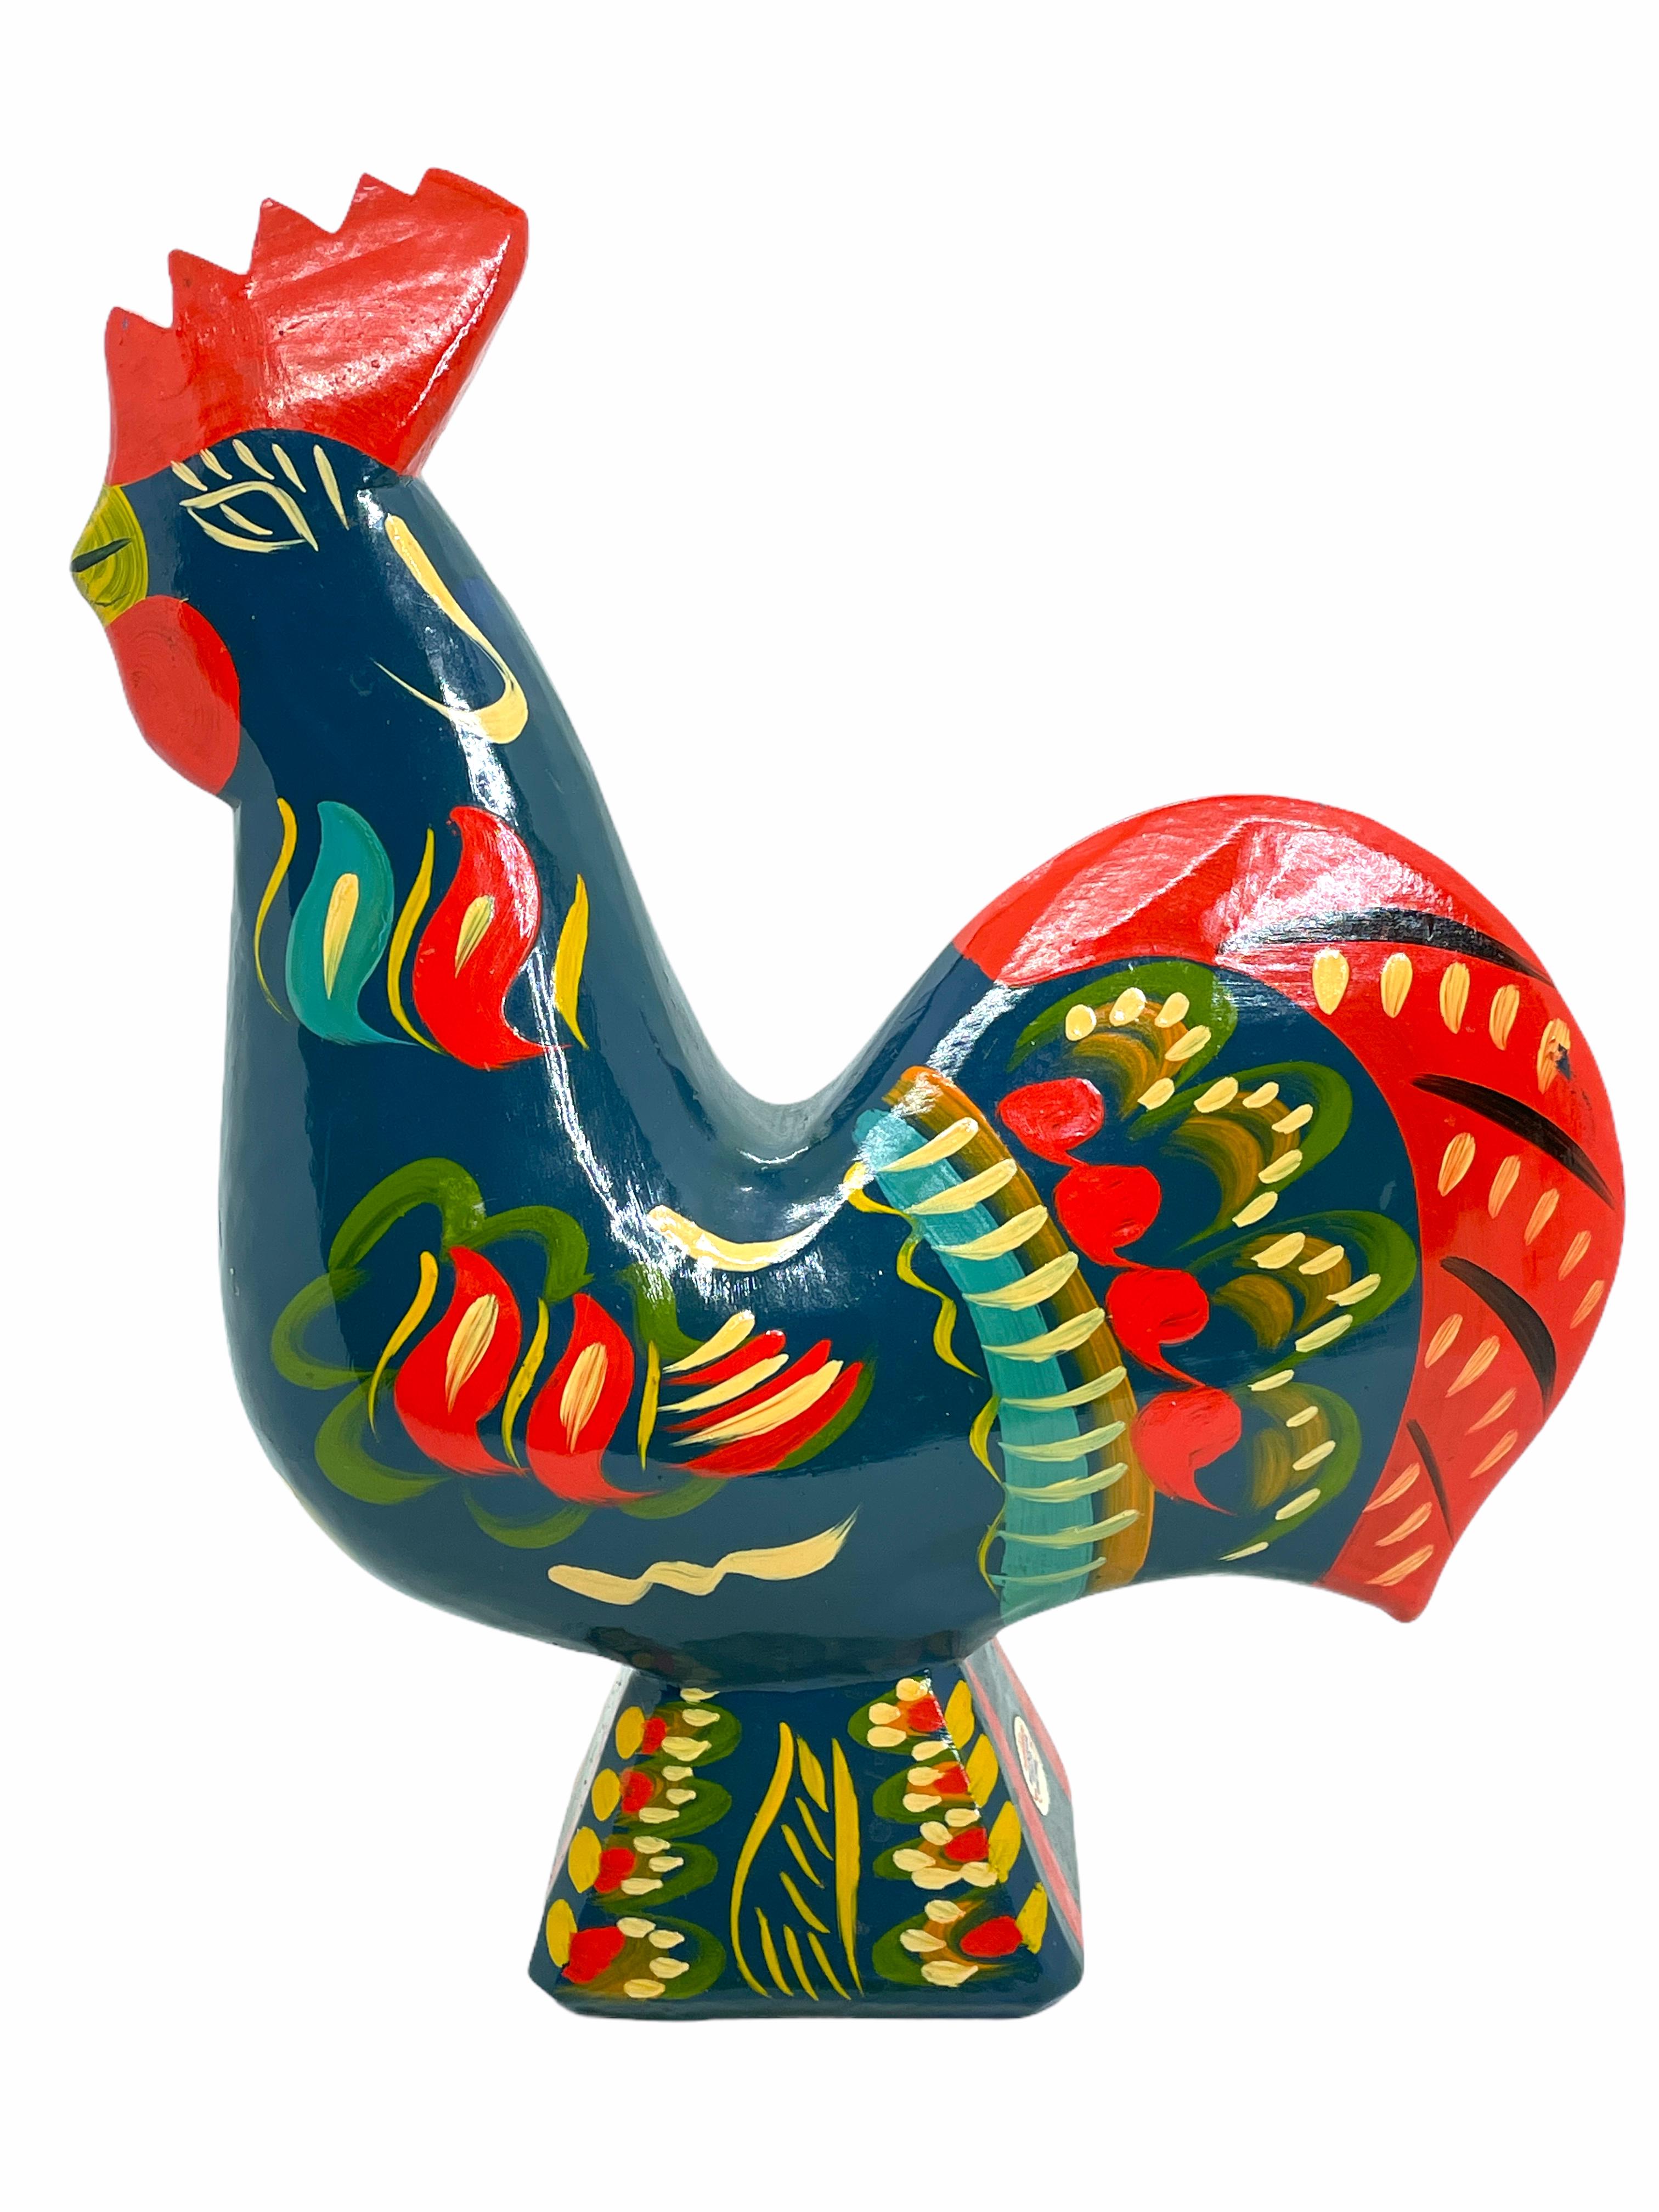 This offer is for a Swedish Dala rooster Chicken by Nils Olsson. It is hand carved painted wood. Nice display item for every room.